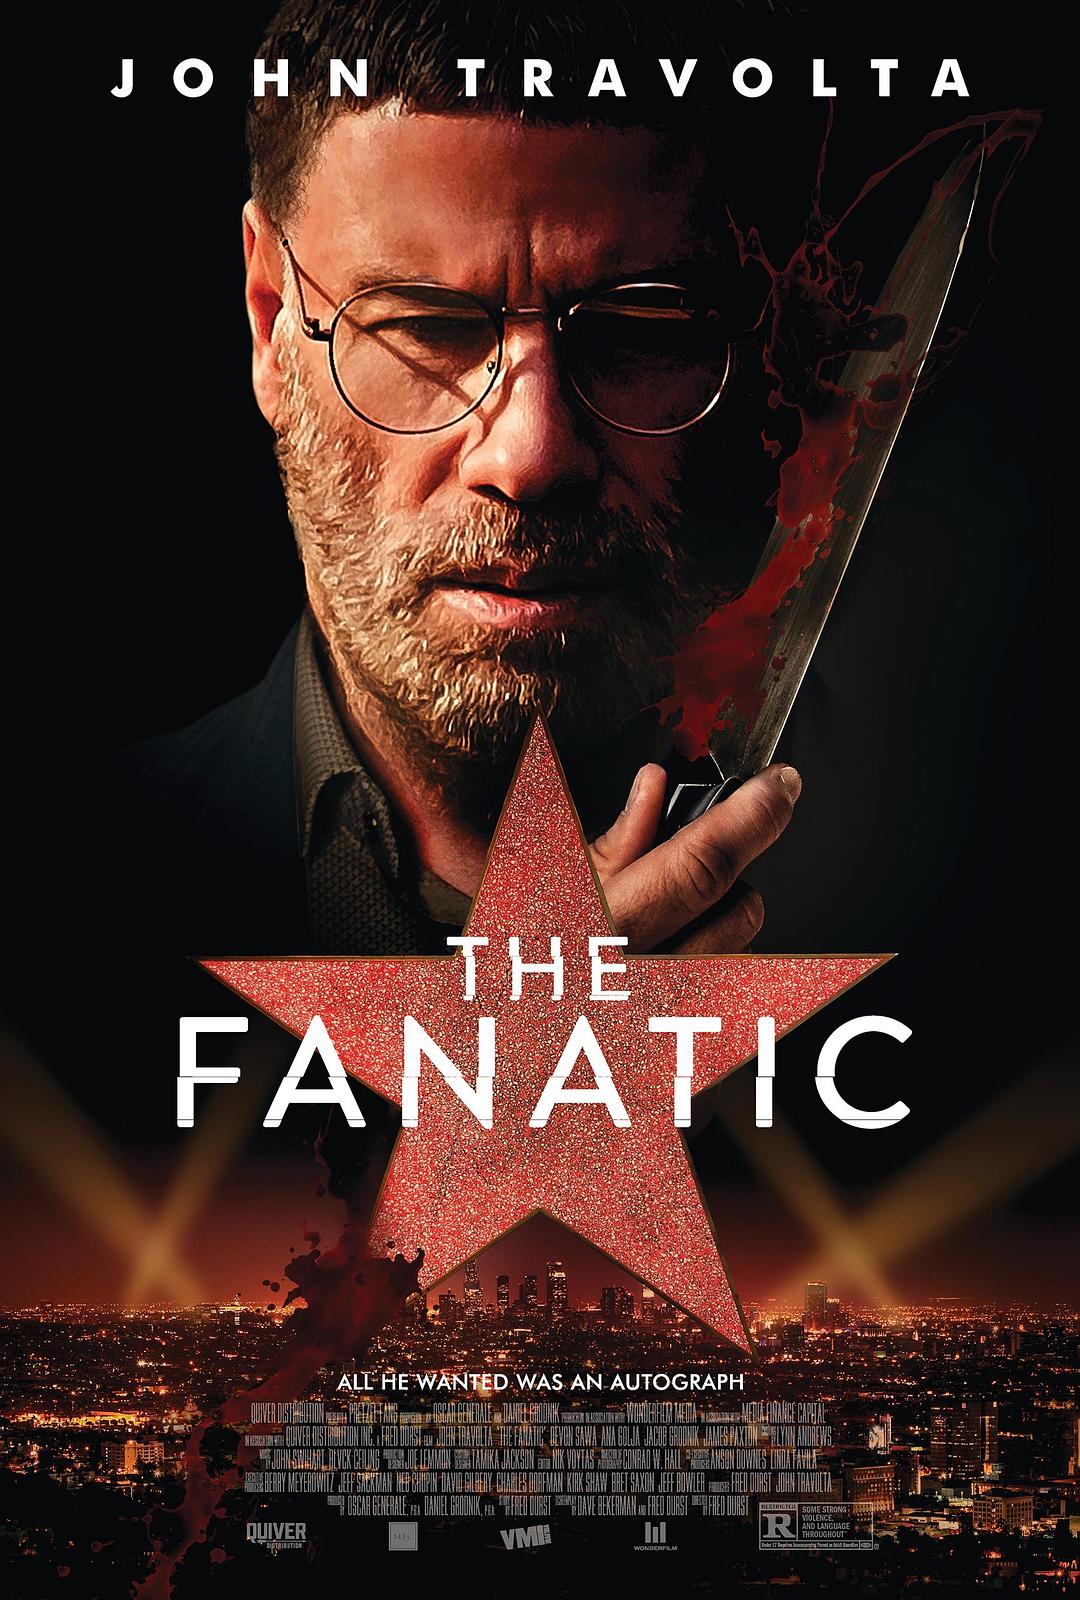  The.Fanatic.2019.720p.BluRay.x264-ROVERS 3.28GB-1.png